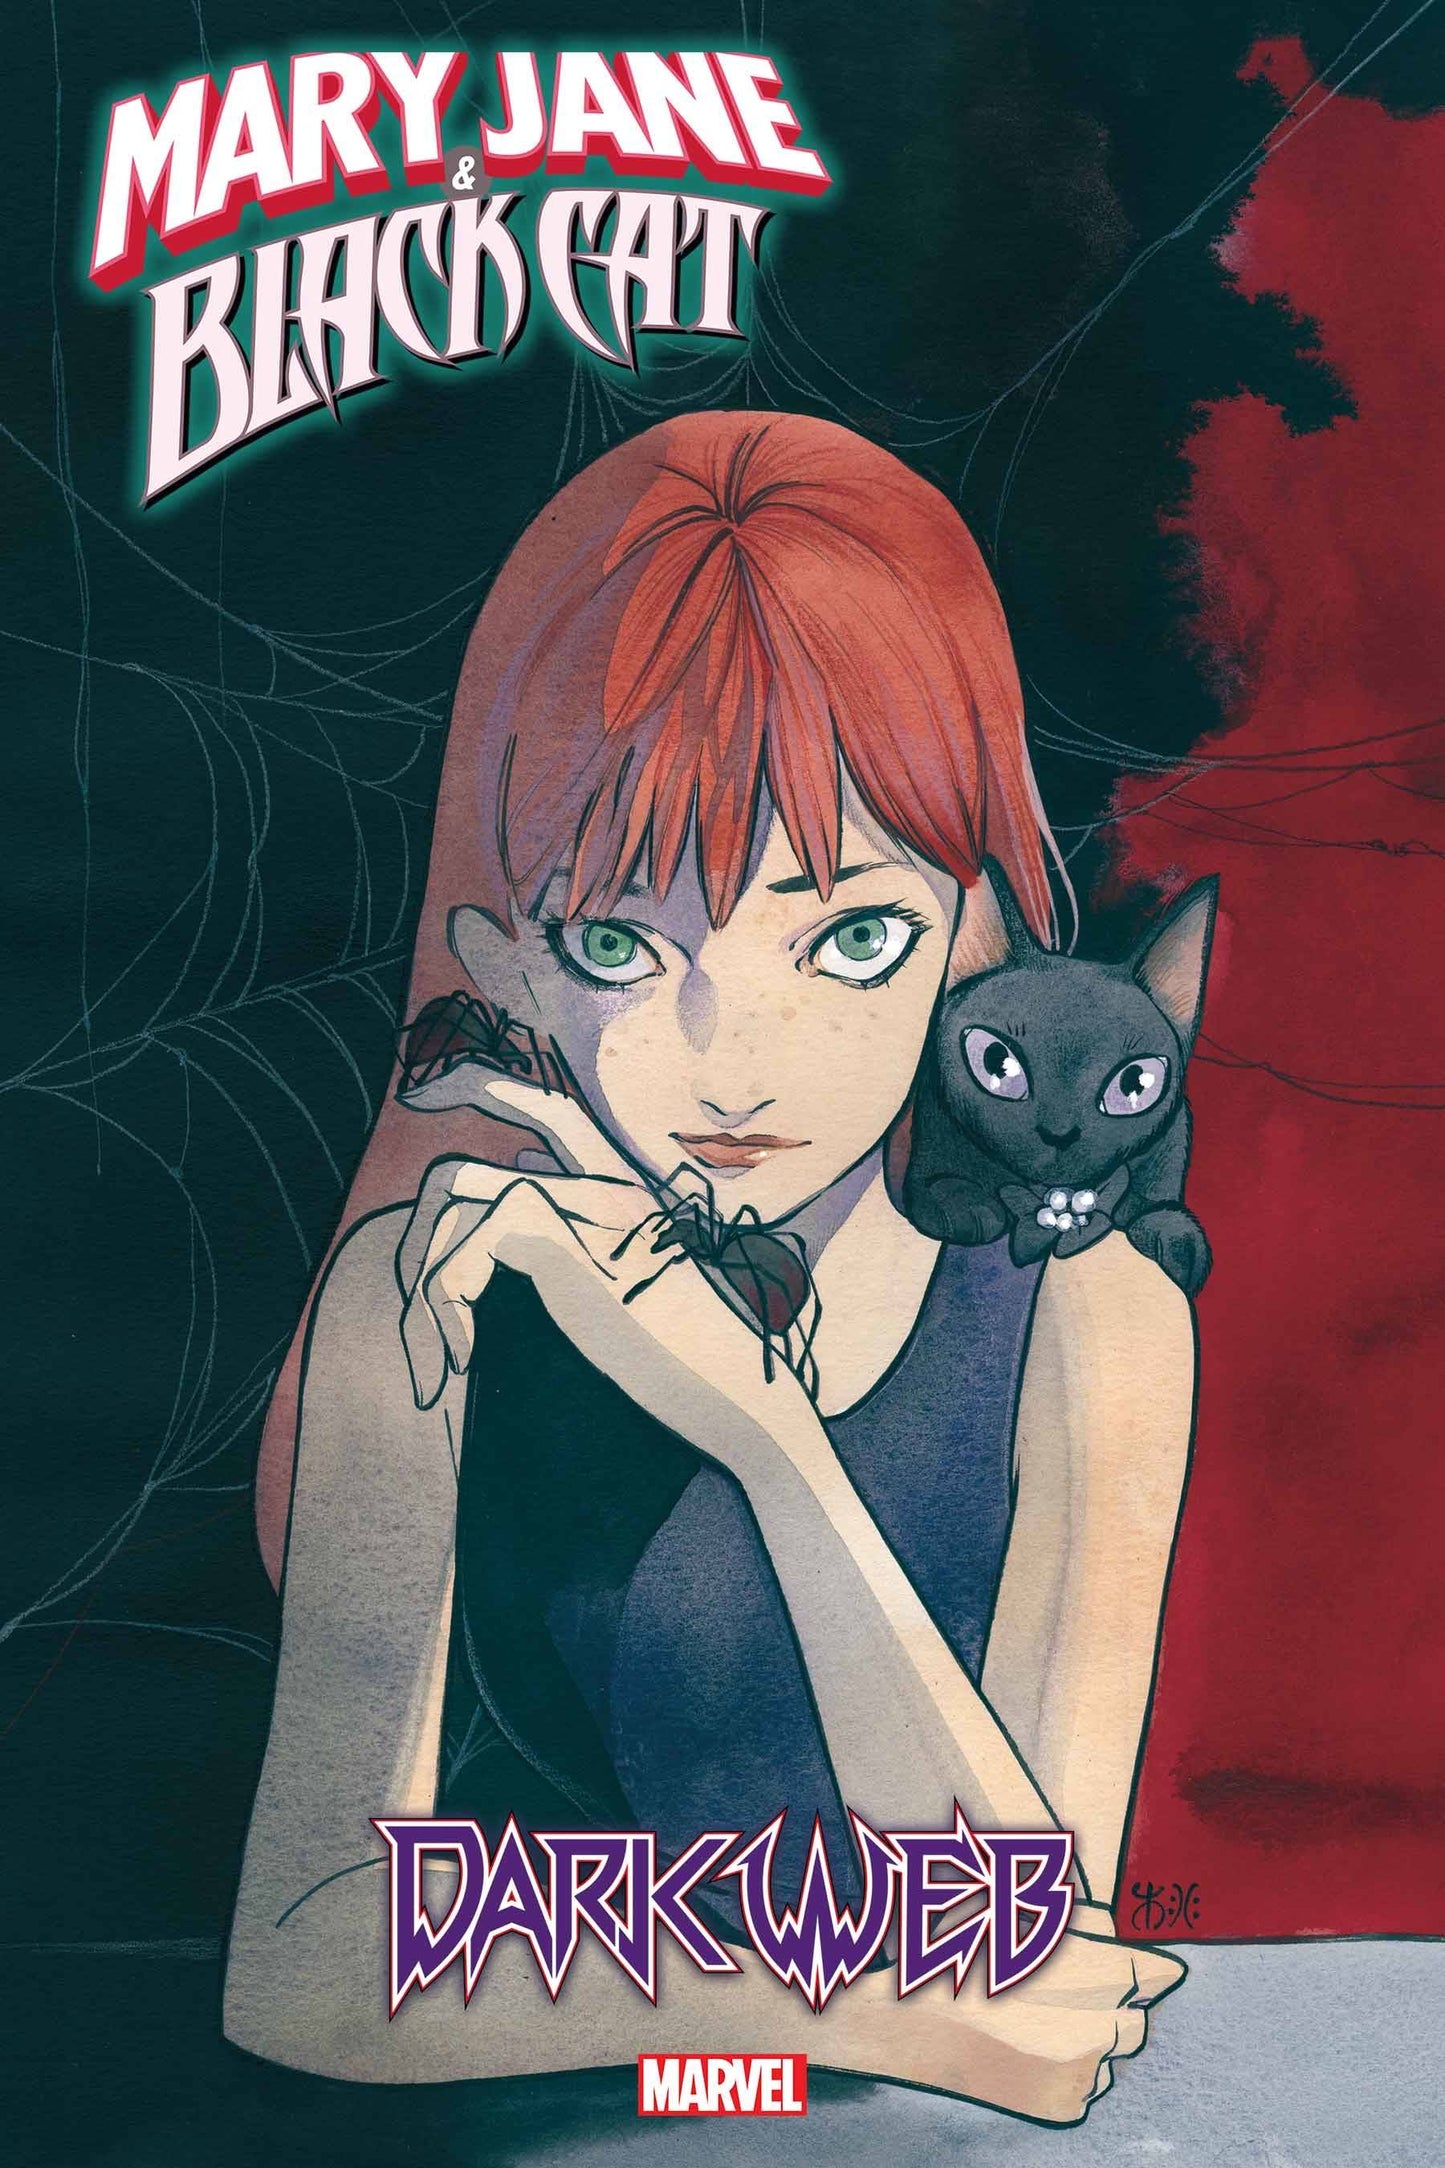 MARY JANE AND BLACK CAT #1 (OF 5)